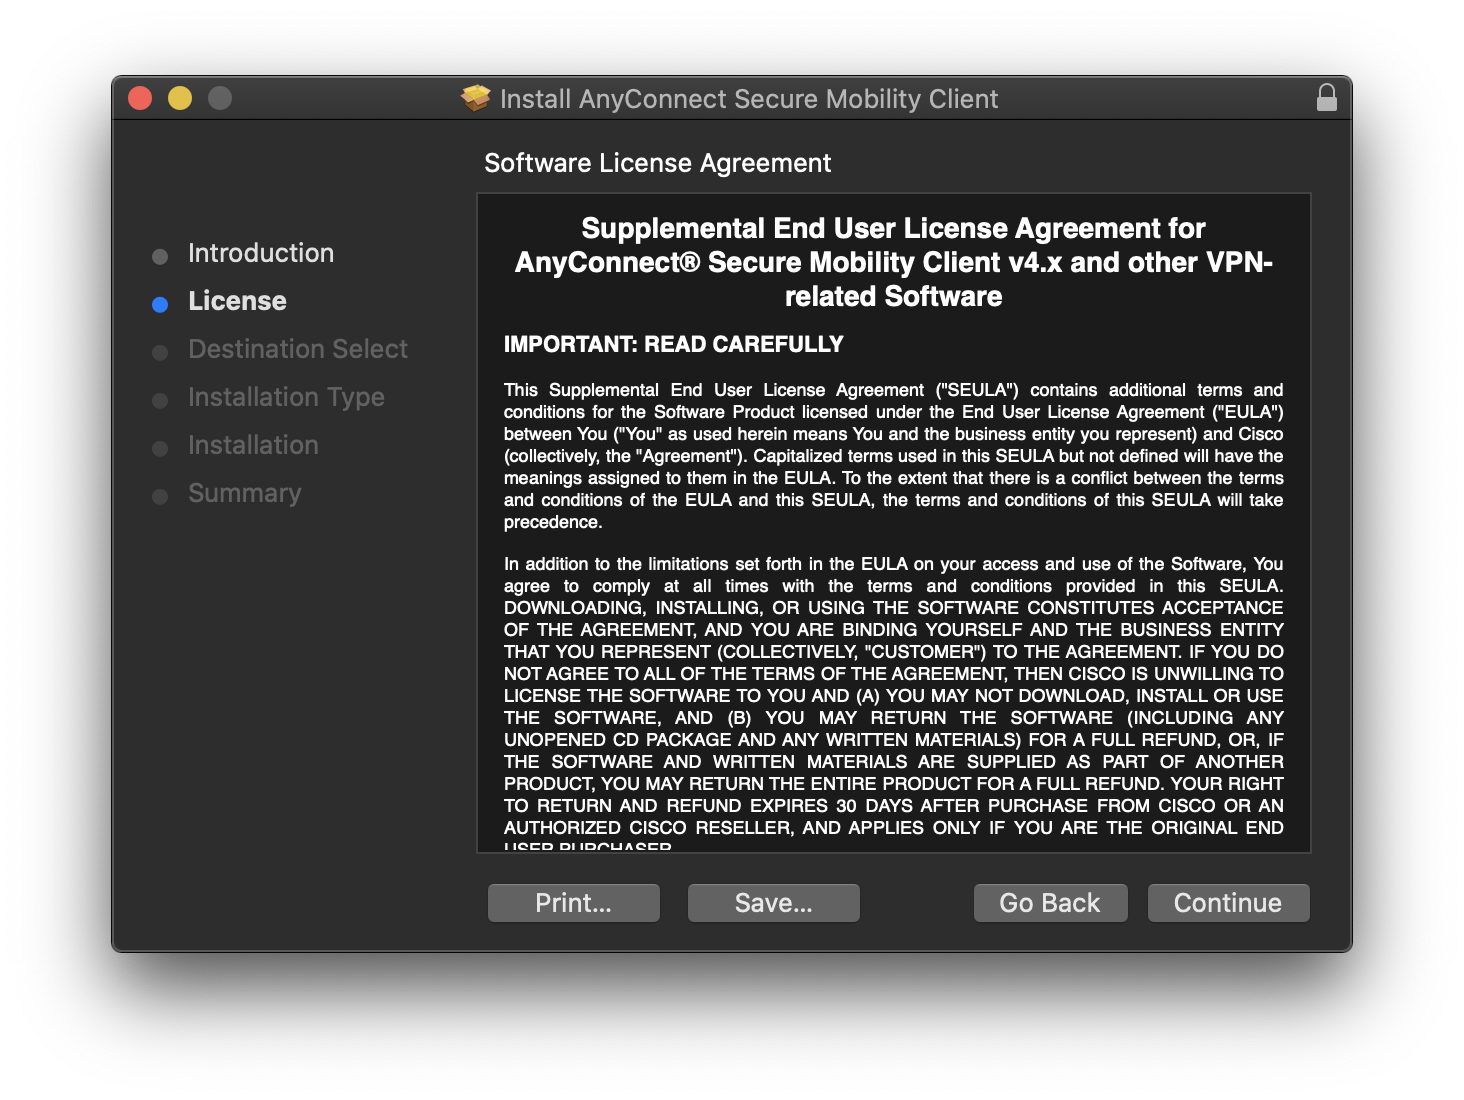 AnyConnect Software License Agreement